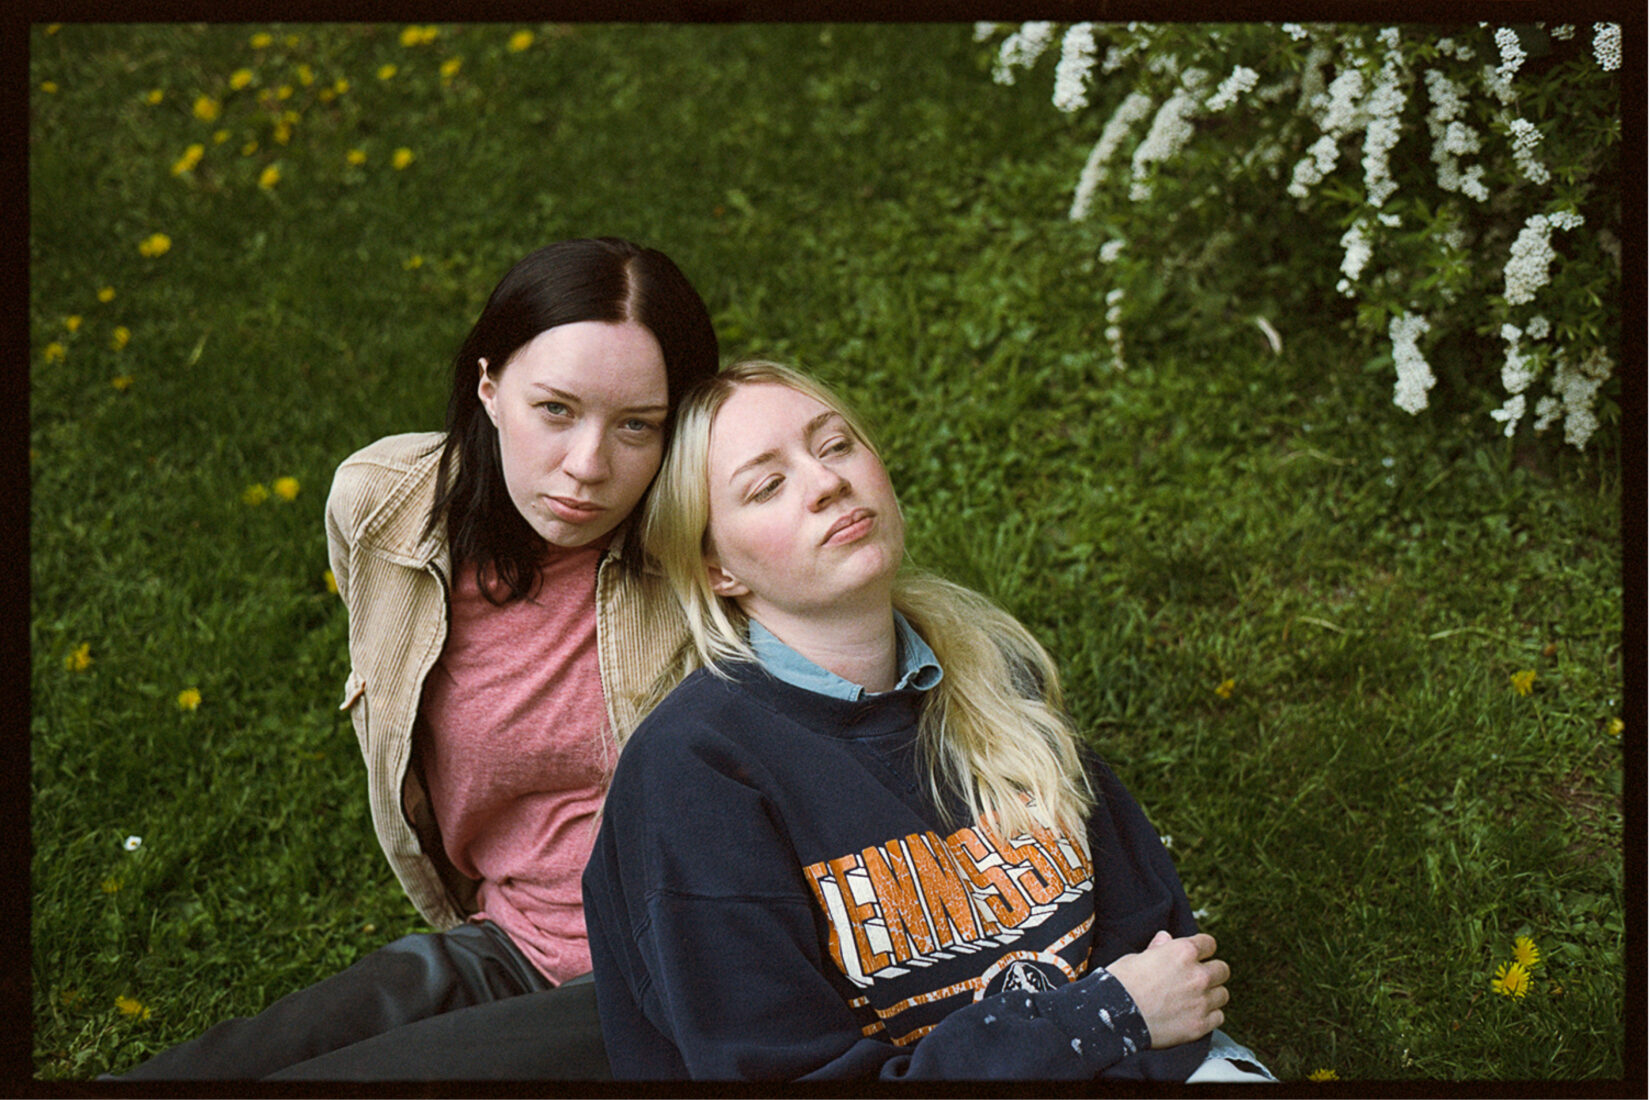 Two young women are sitting in the grass close to each other.